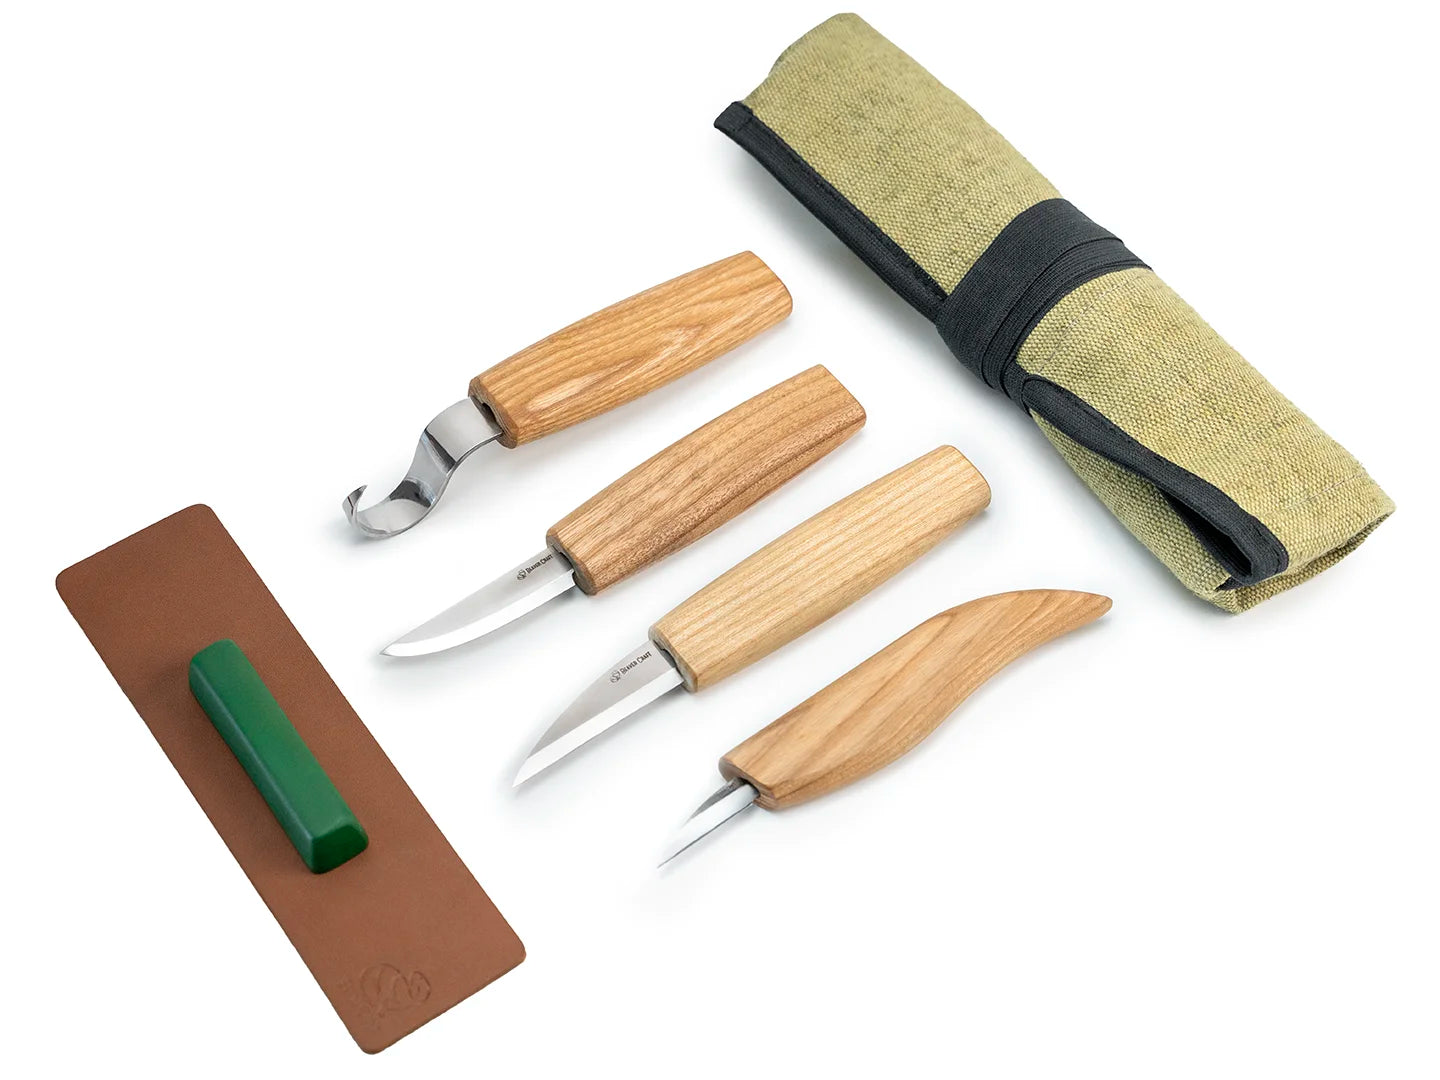 Wood Carving Tools Set Knives Spoon Knife Whittling Knives TOP Tool  BeaverCraft